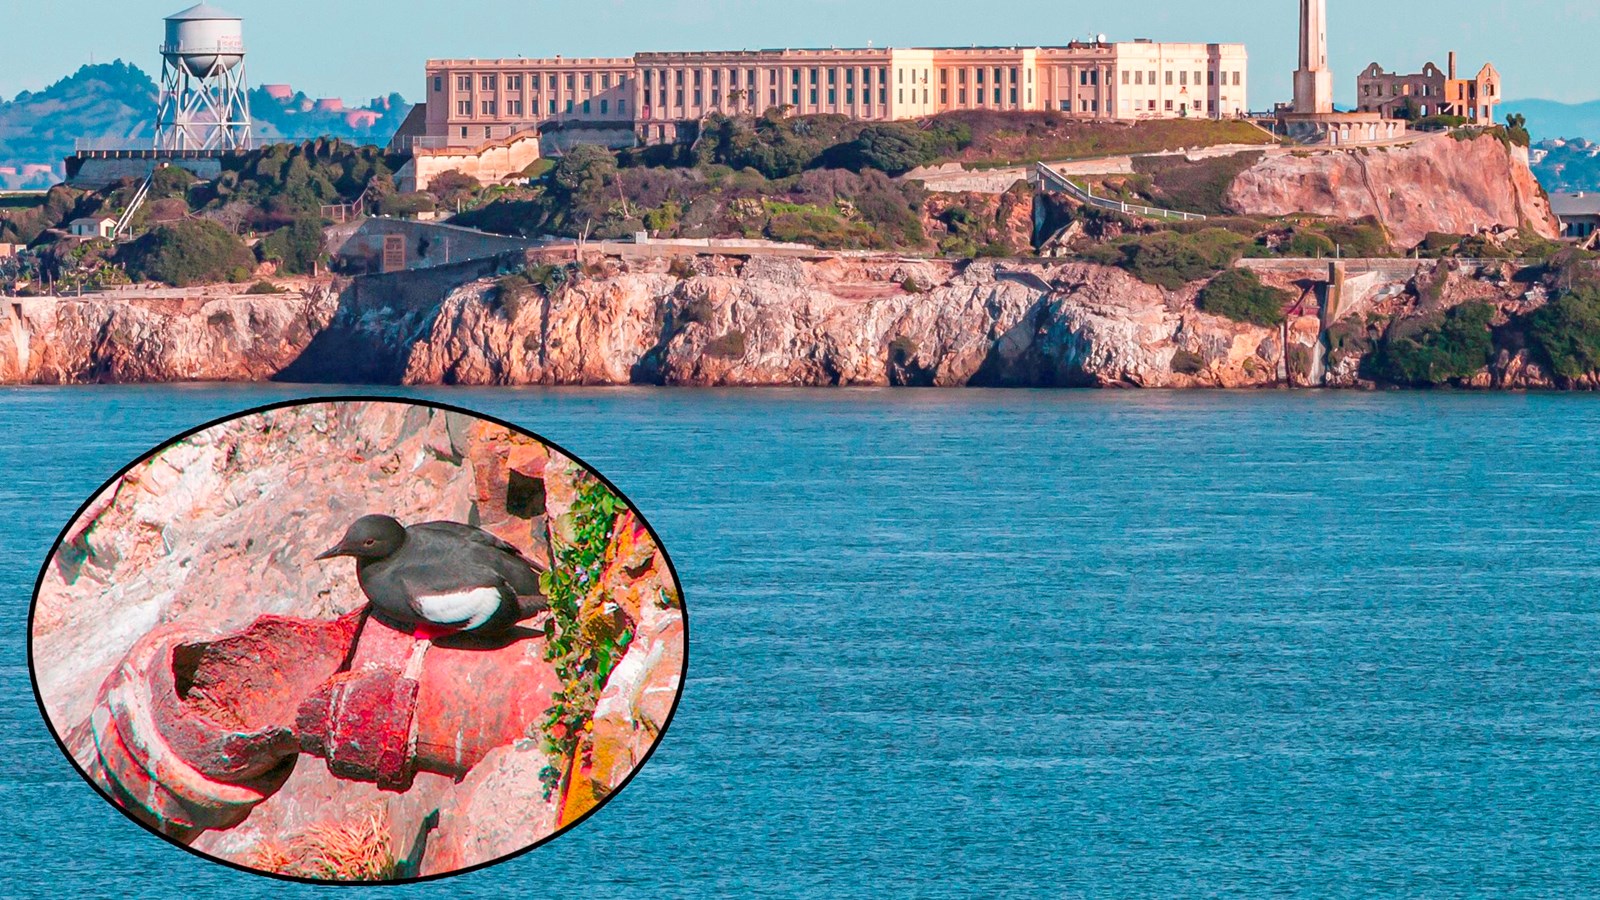 Colored photo of Alcatraz Island from the water with an inset image of a black pigeon guillemot